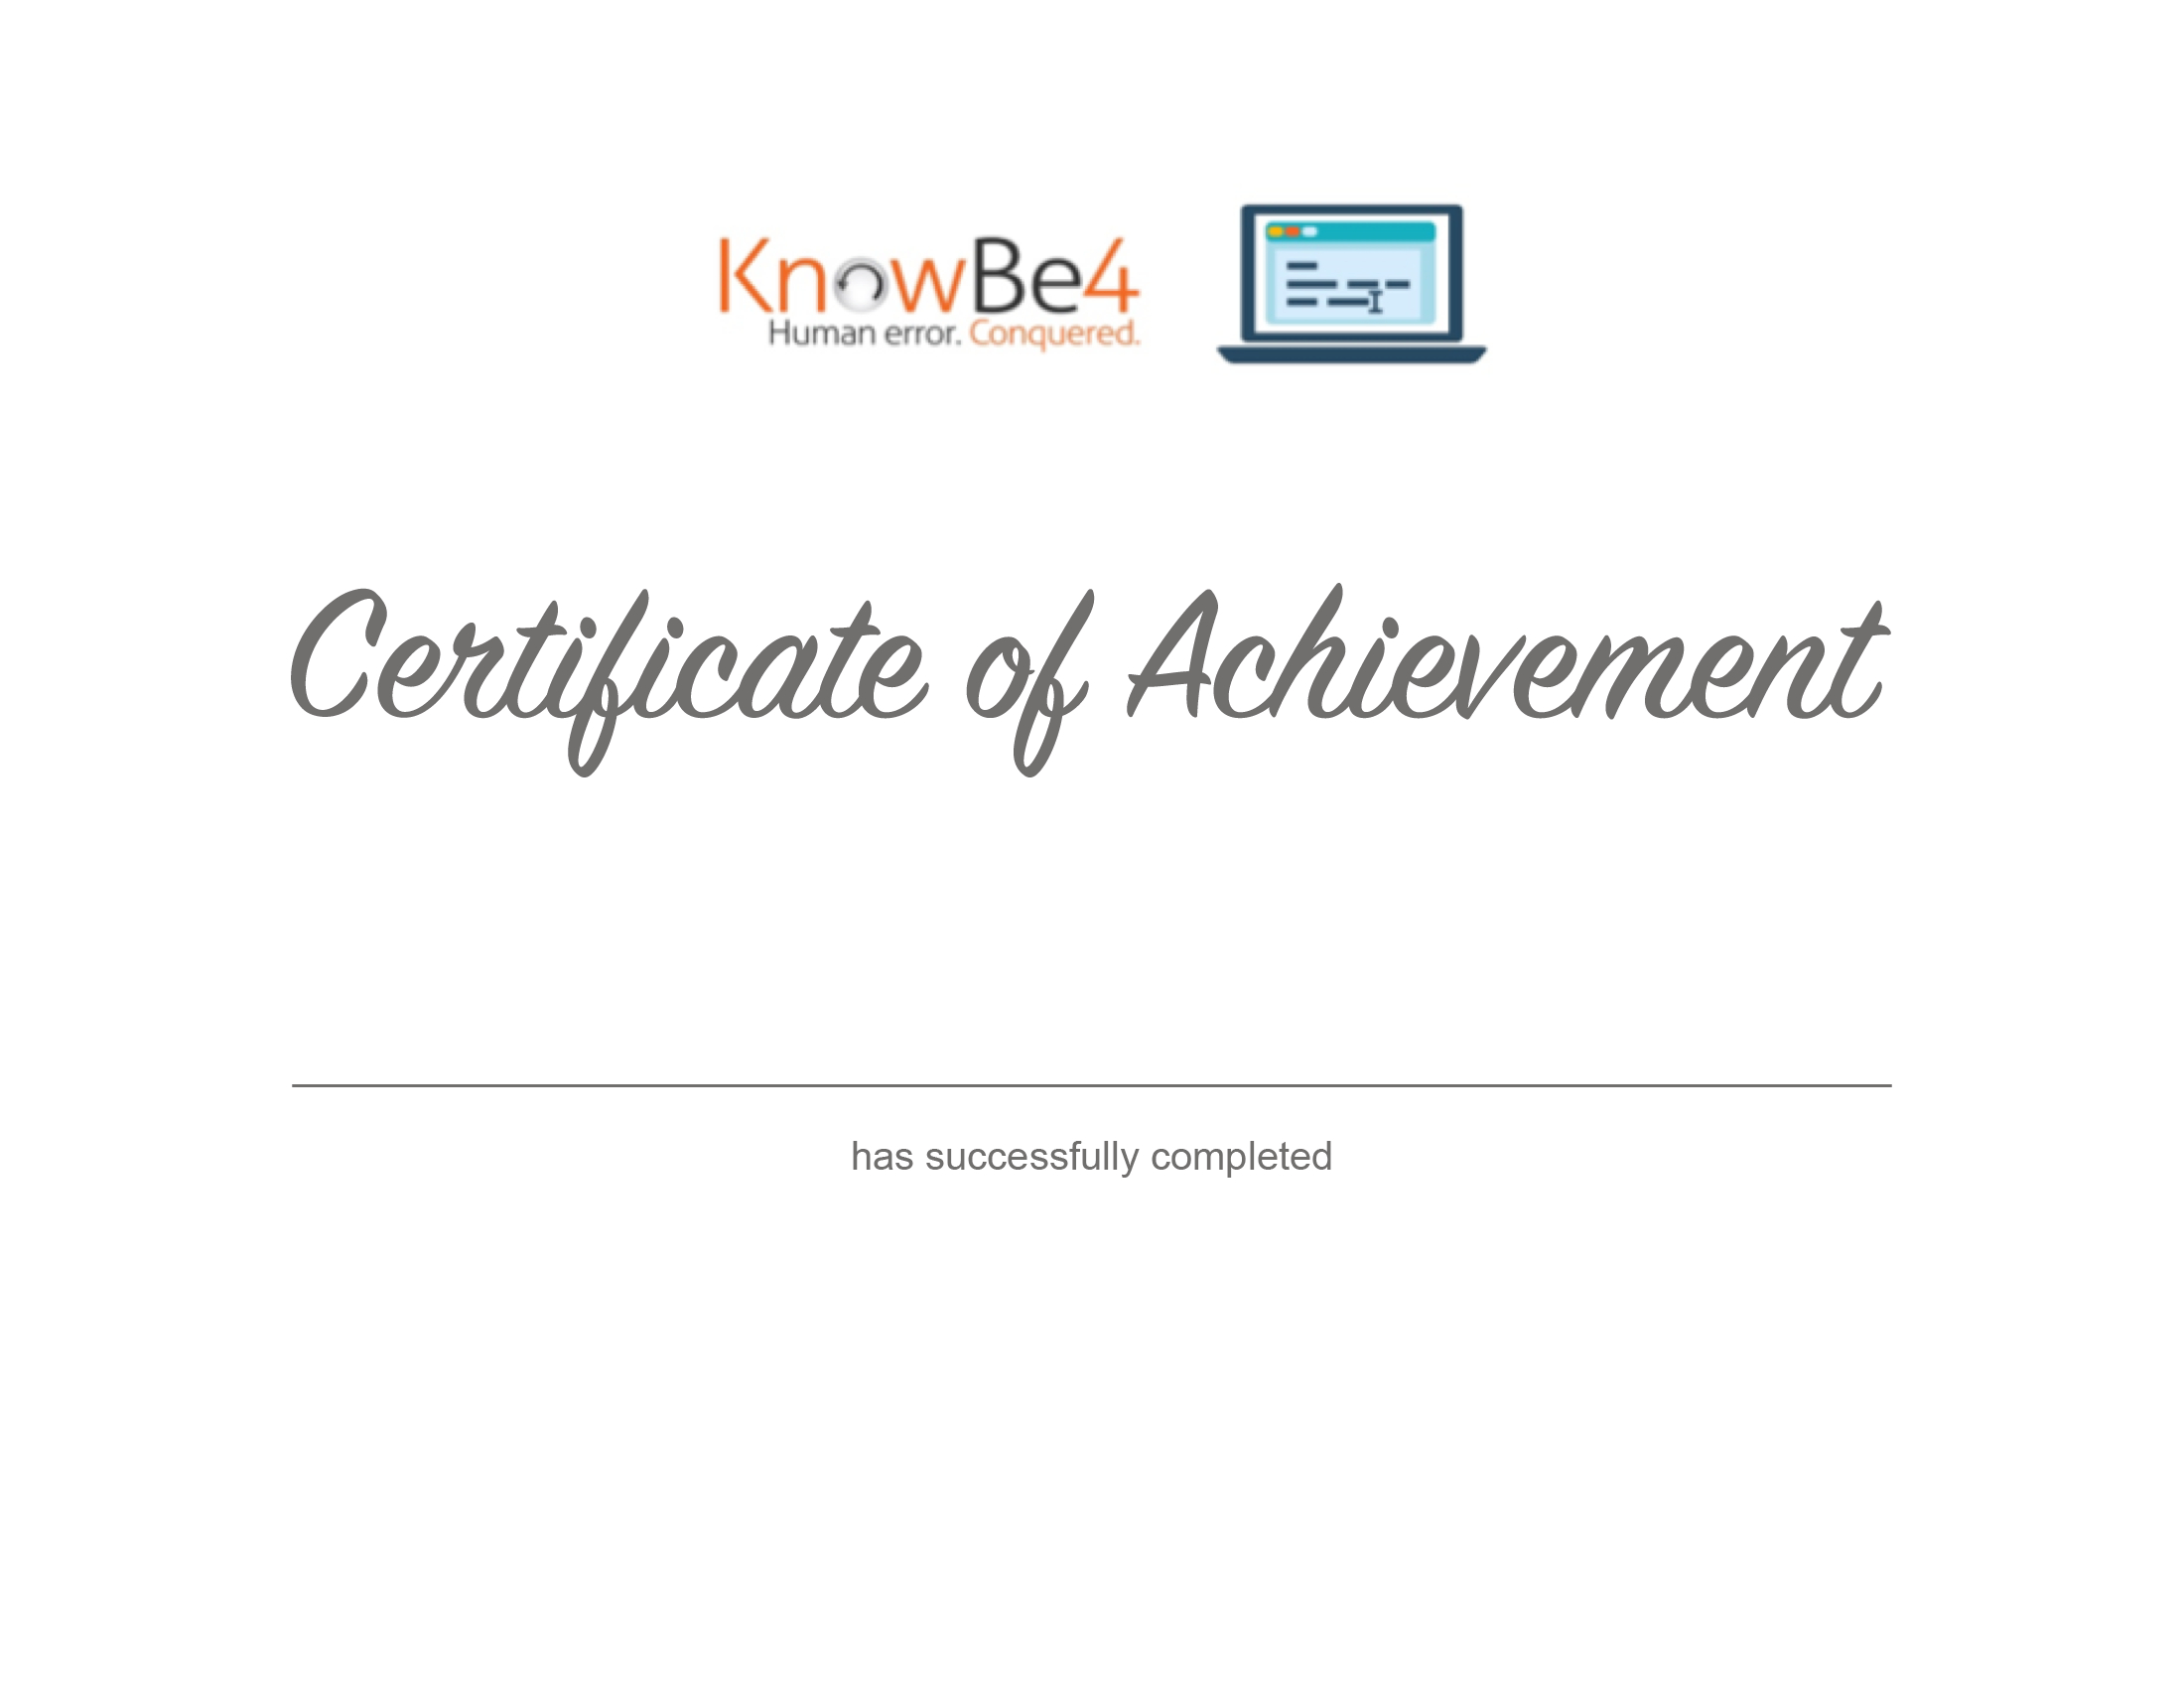 How Do I Customize My Users' Training Certificates Intended For No Certificate Templates Could Be Found